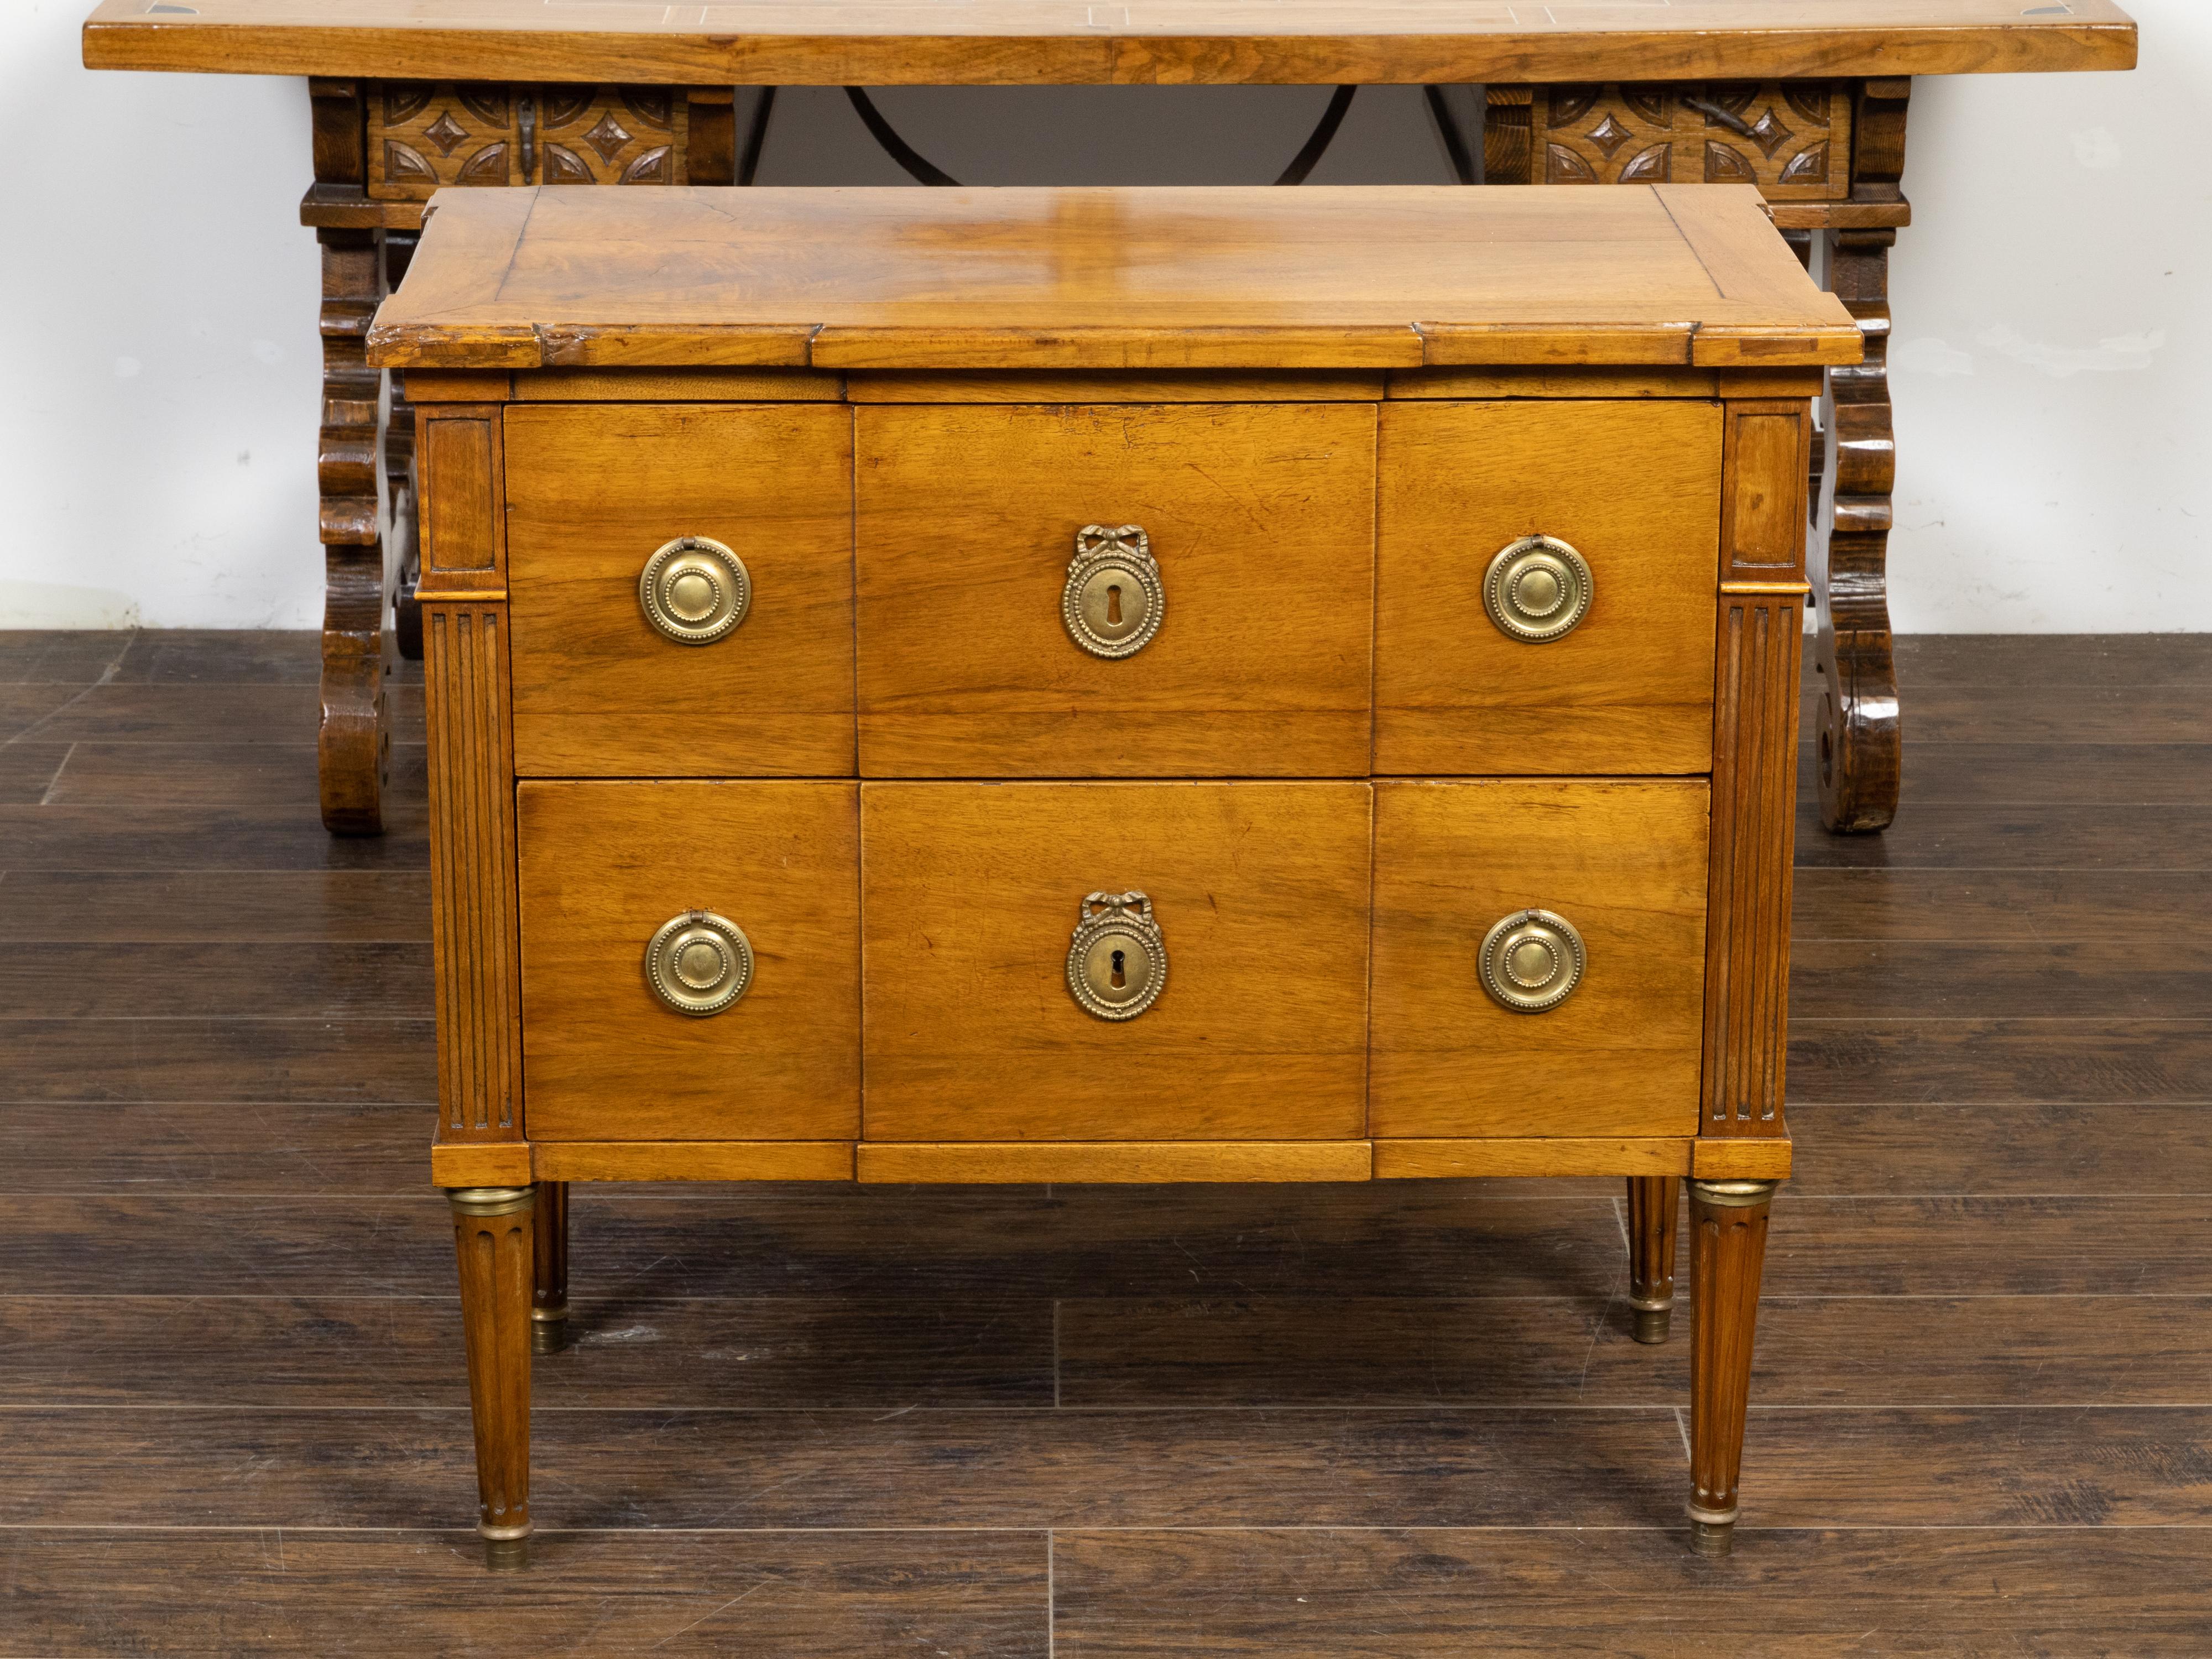 A French Louis XVI style breakfront walnut commode from the 19th century, with two drawers, fluted pilasters, tapered cylindrical legs and brass hardware. Created in France during the 19th century, this walnut commode features a rectangular top with